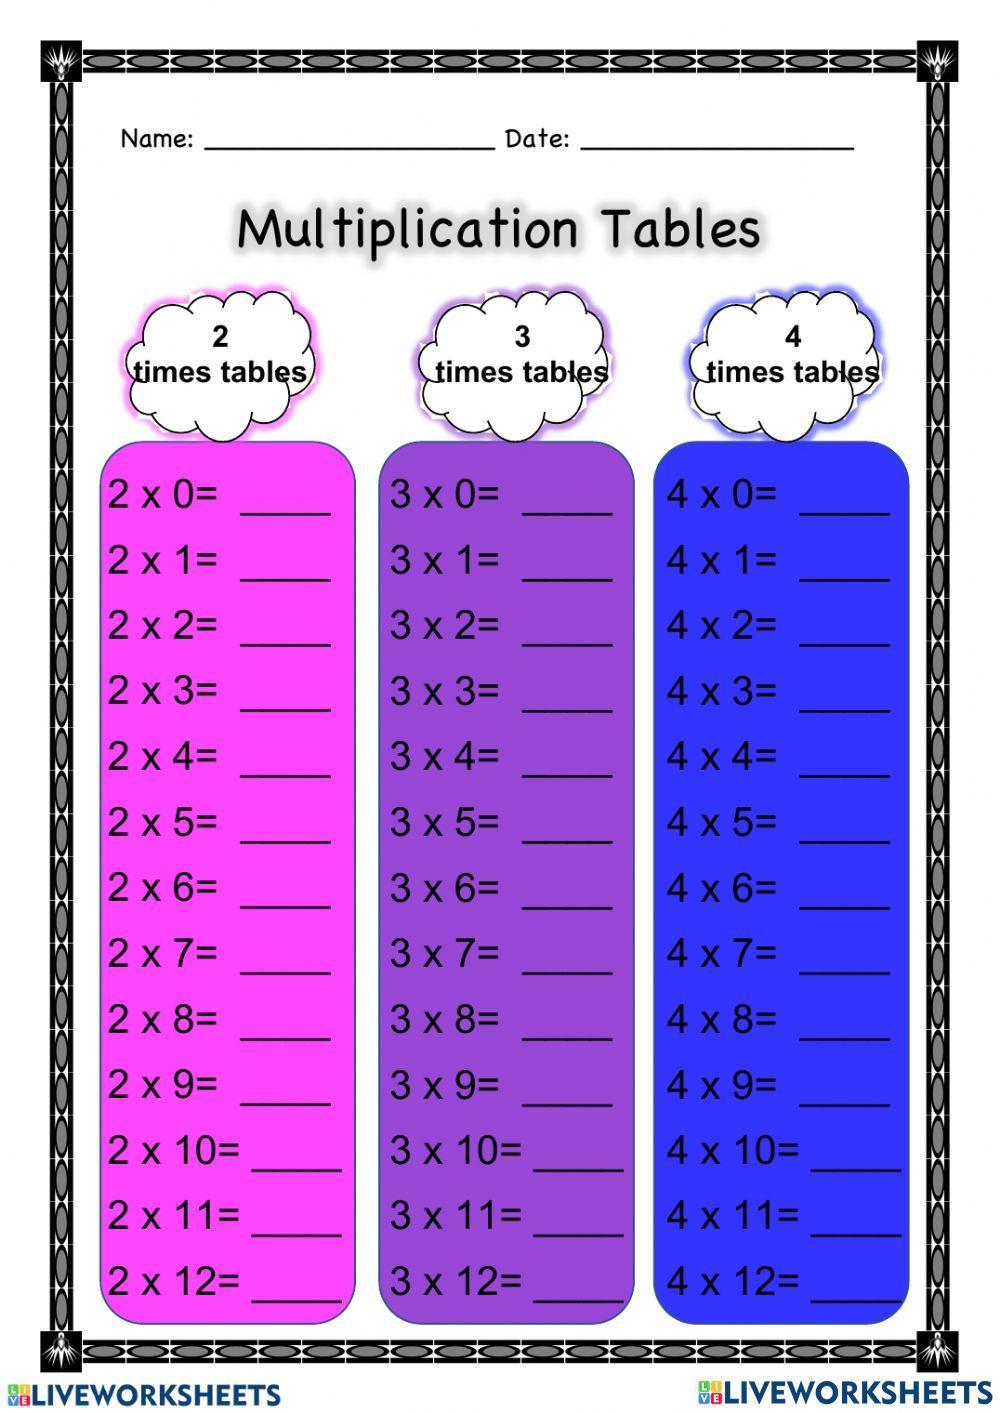 Times tables  2 3 and 4(COPIED FROM Gierszewski)